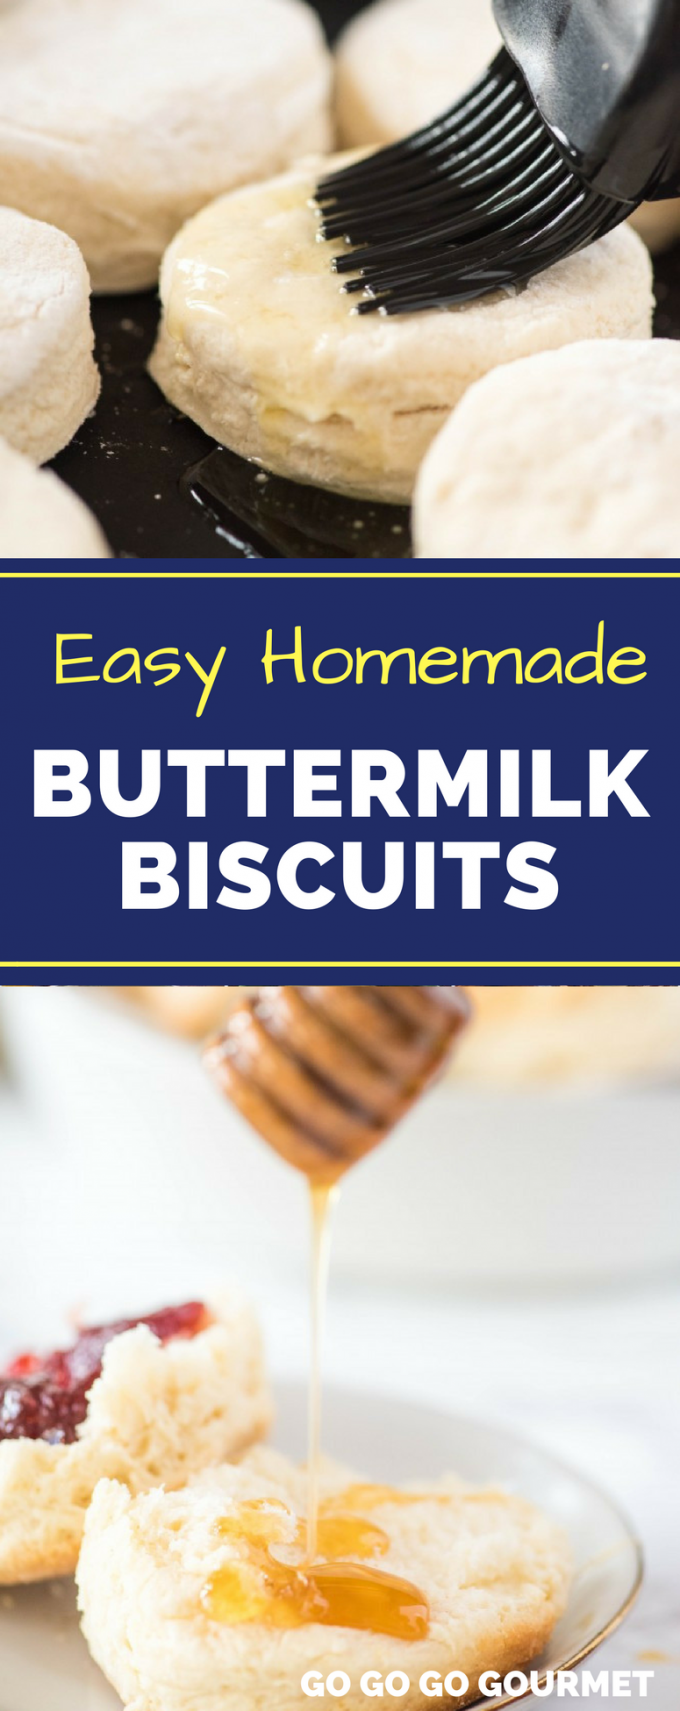 Move over Pioneer Woman, these are the best homemade buttermilk biscuits! Using self rising flour, buttermilk and butter, you will be amazed at how easy it is to make biscuits from scratch! #homemadebuttermilkbiscuits #easyhomemaderecipes #easybiscuitrecipe #gogogogourmet via @gogogogourmet